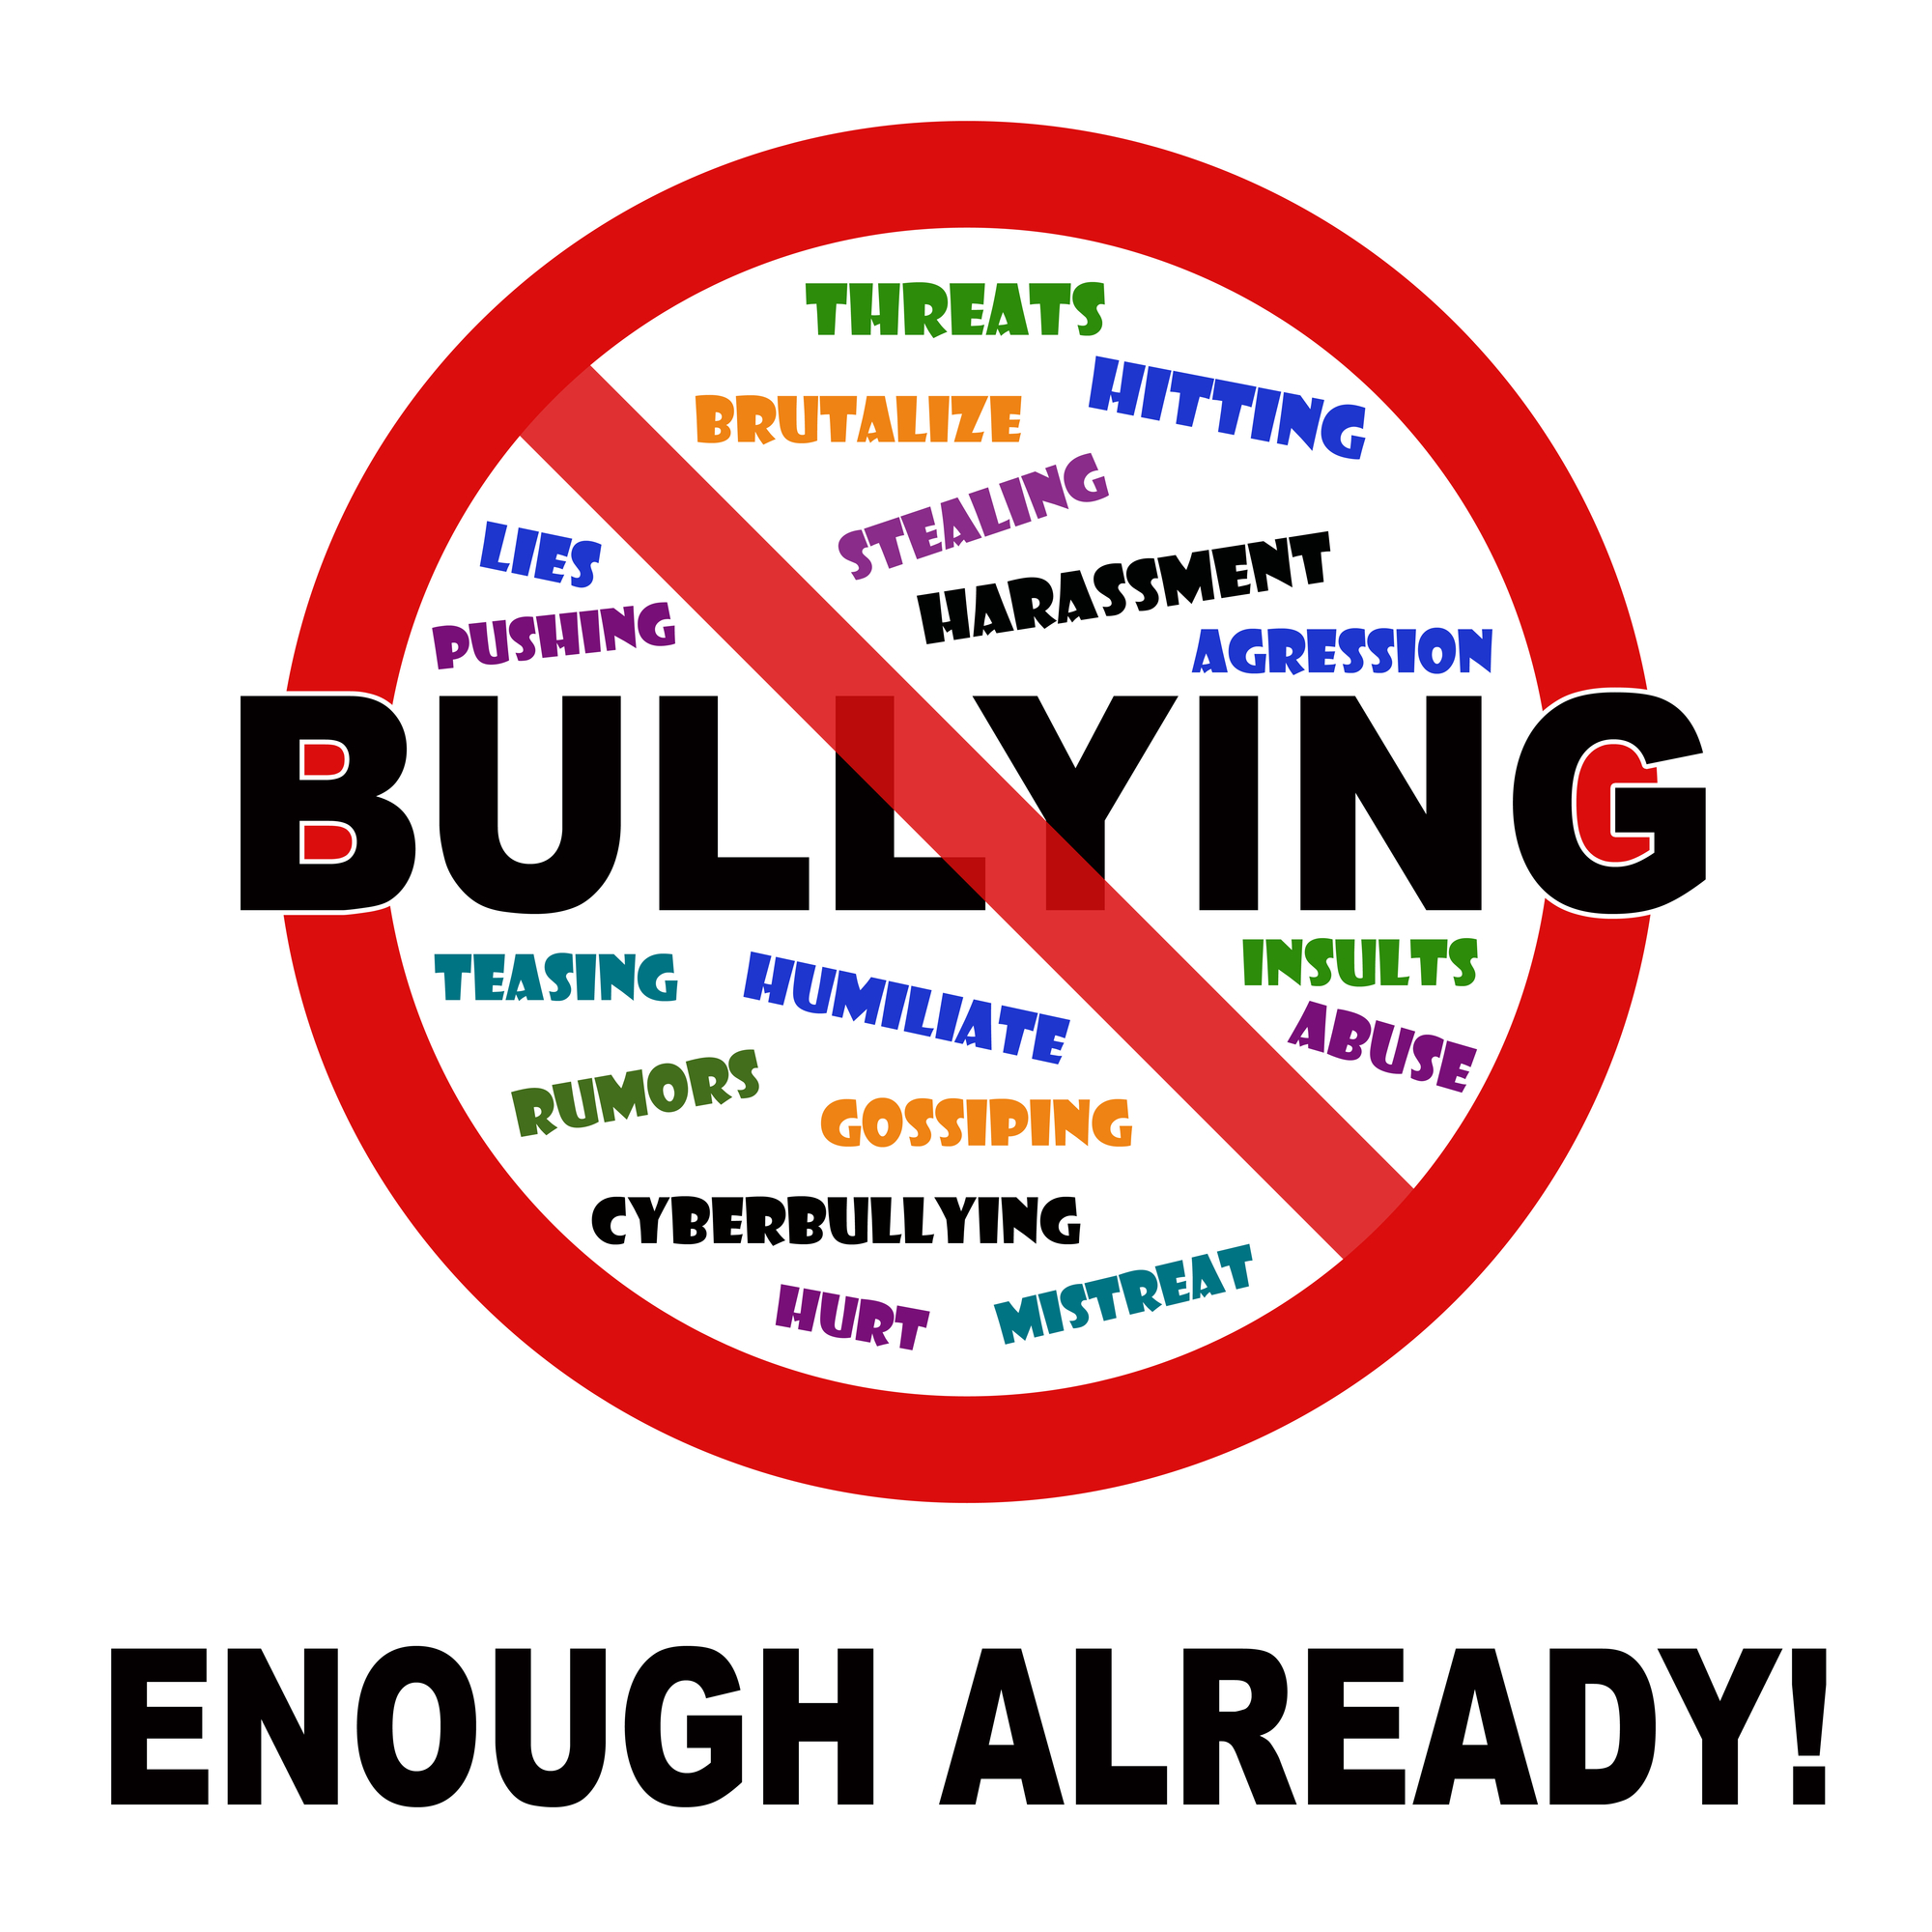 How Schools Should React to Reports of Bullying